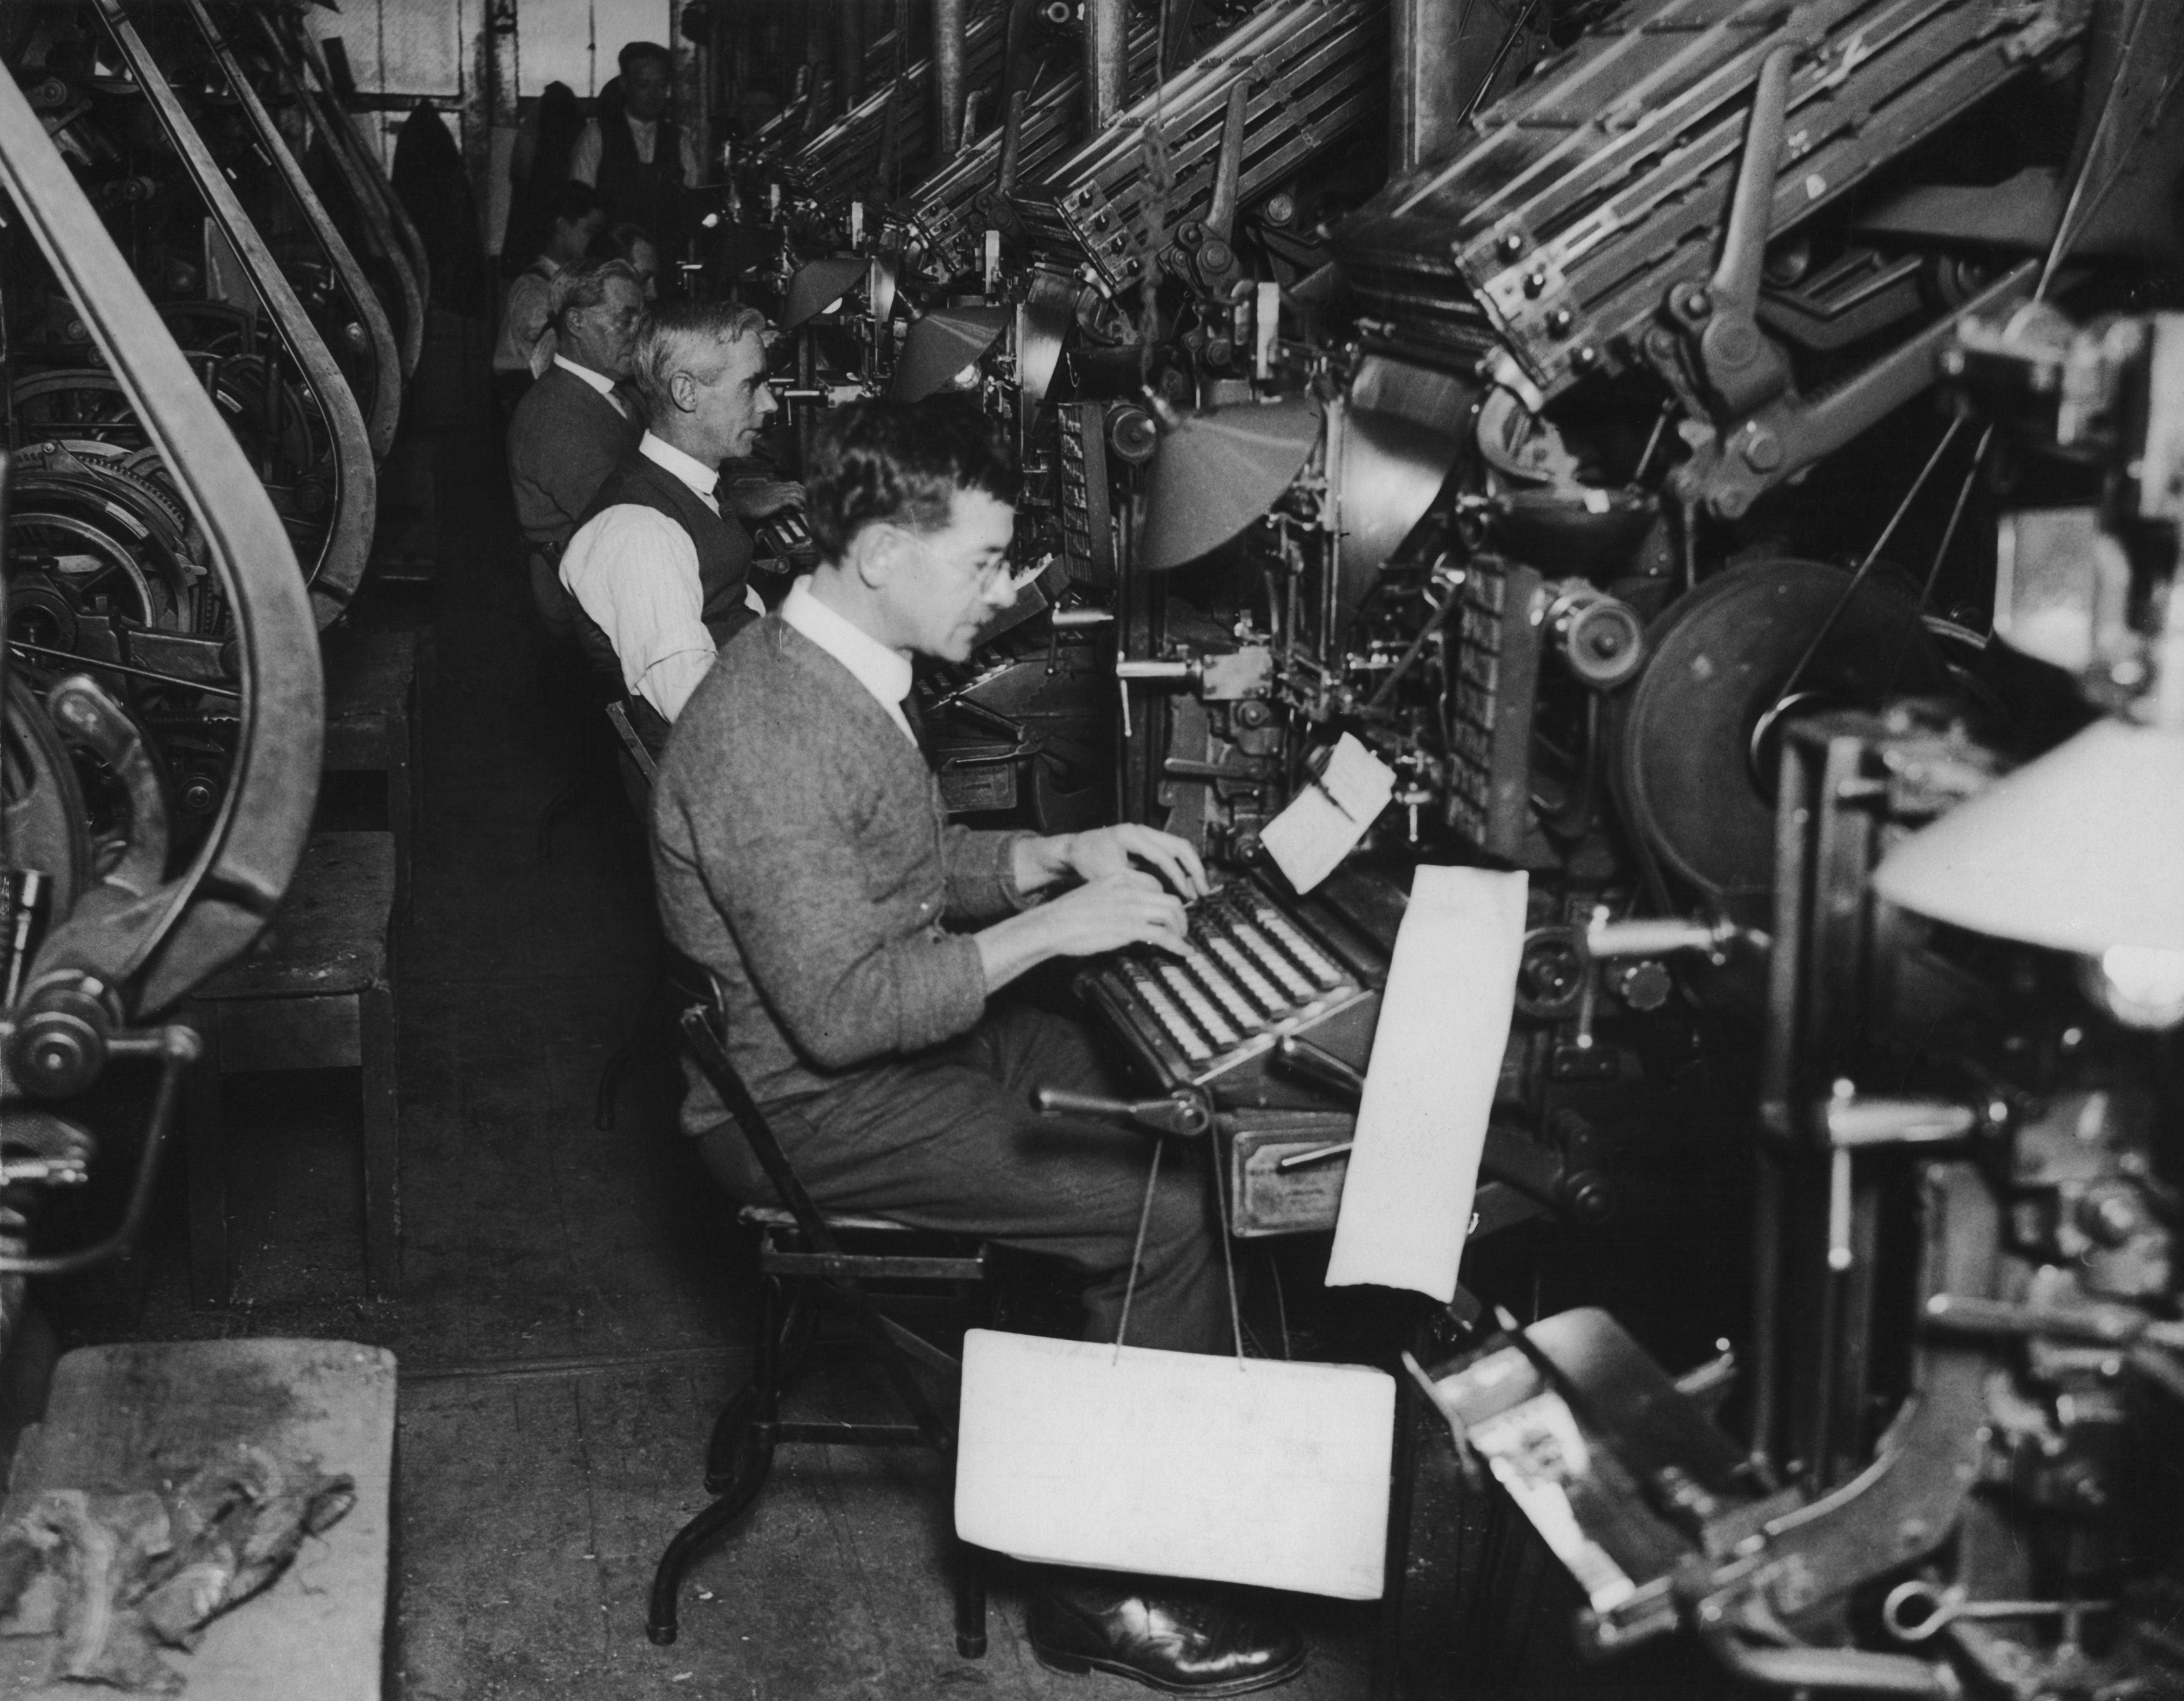 The linotype department of a large London newspaper, circa 1930.